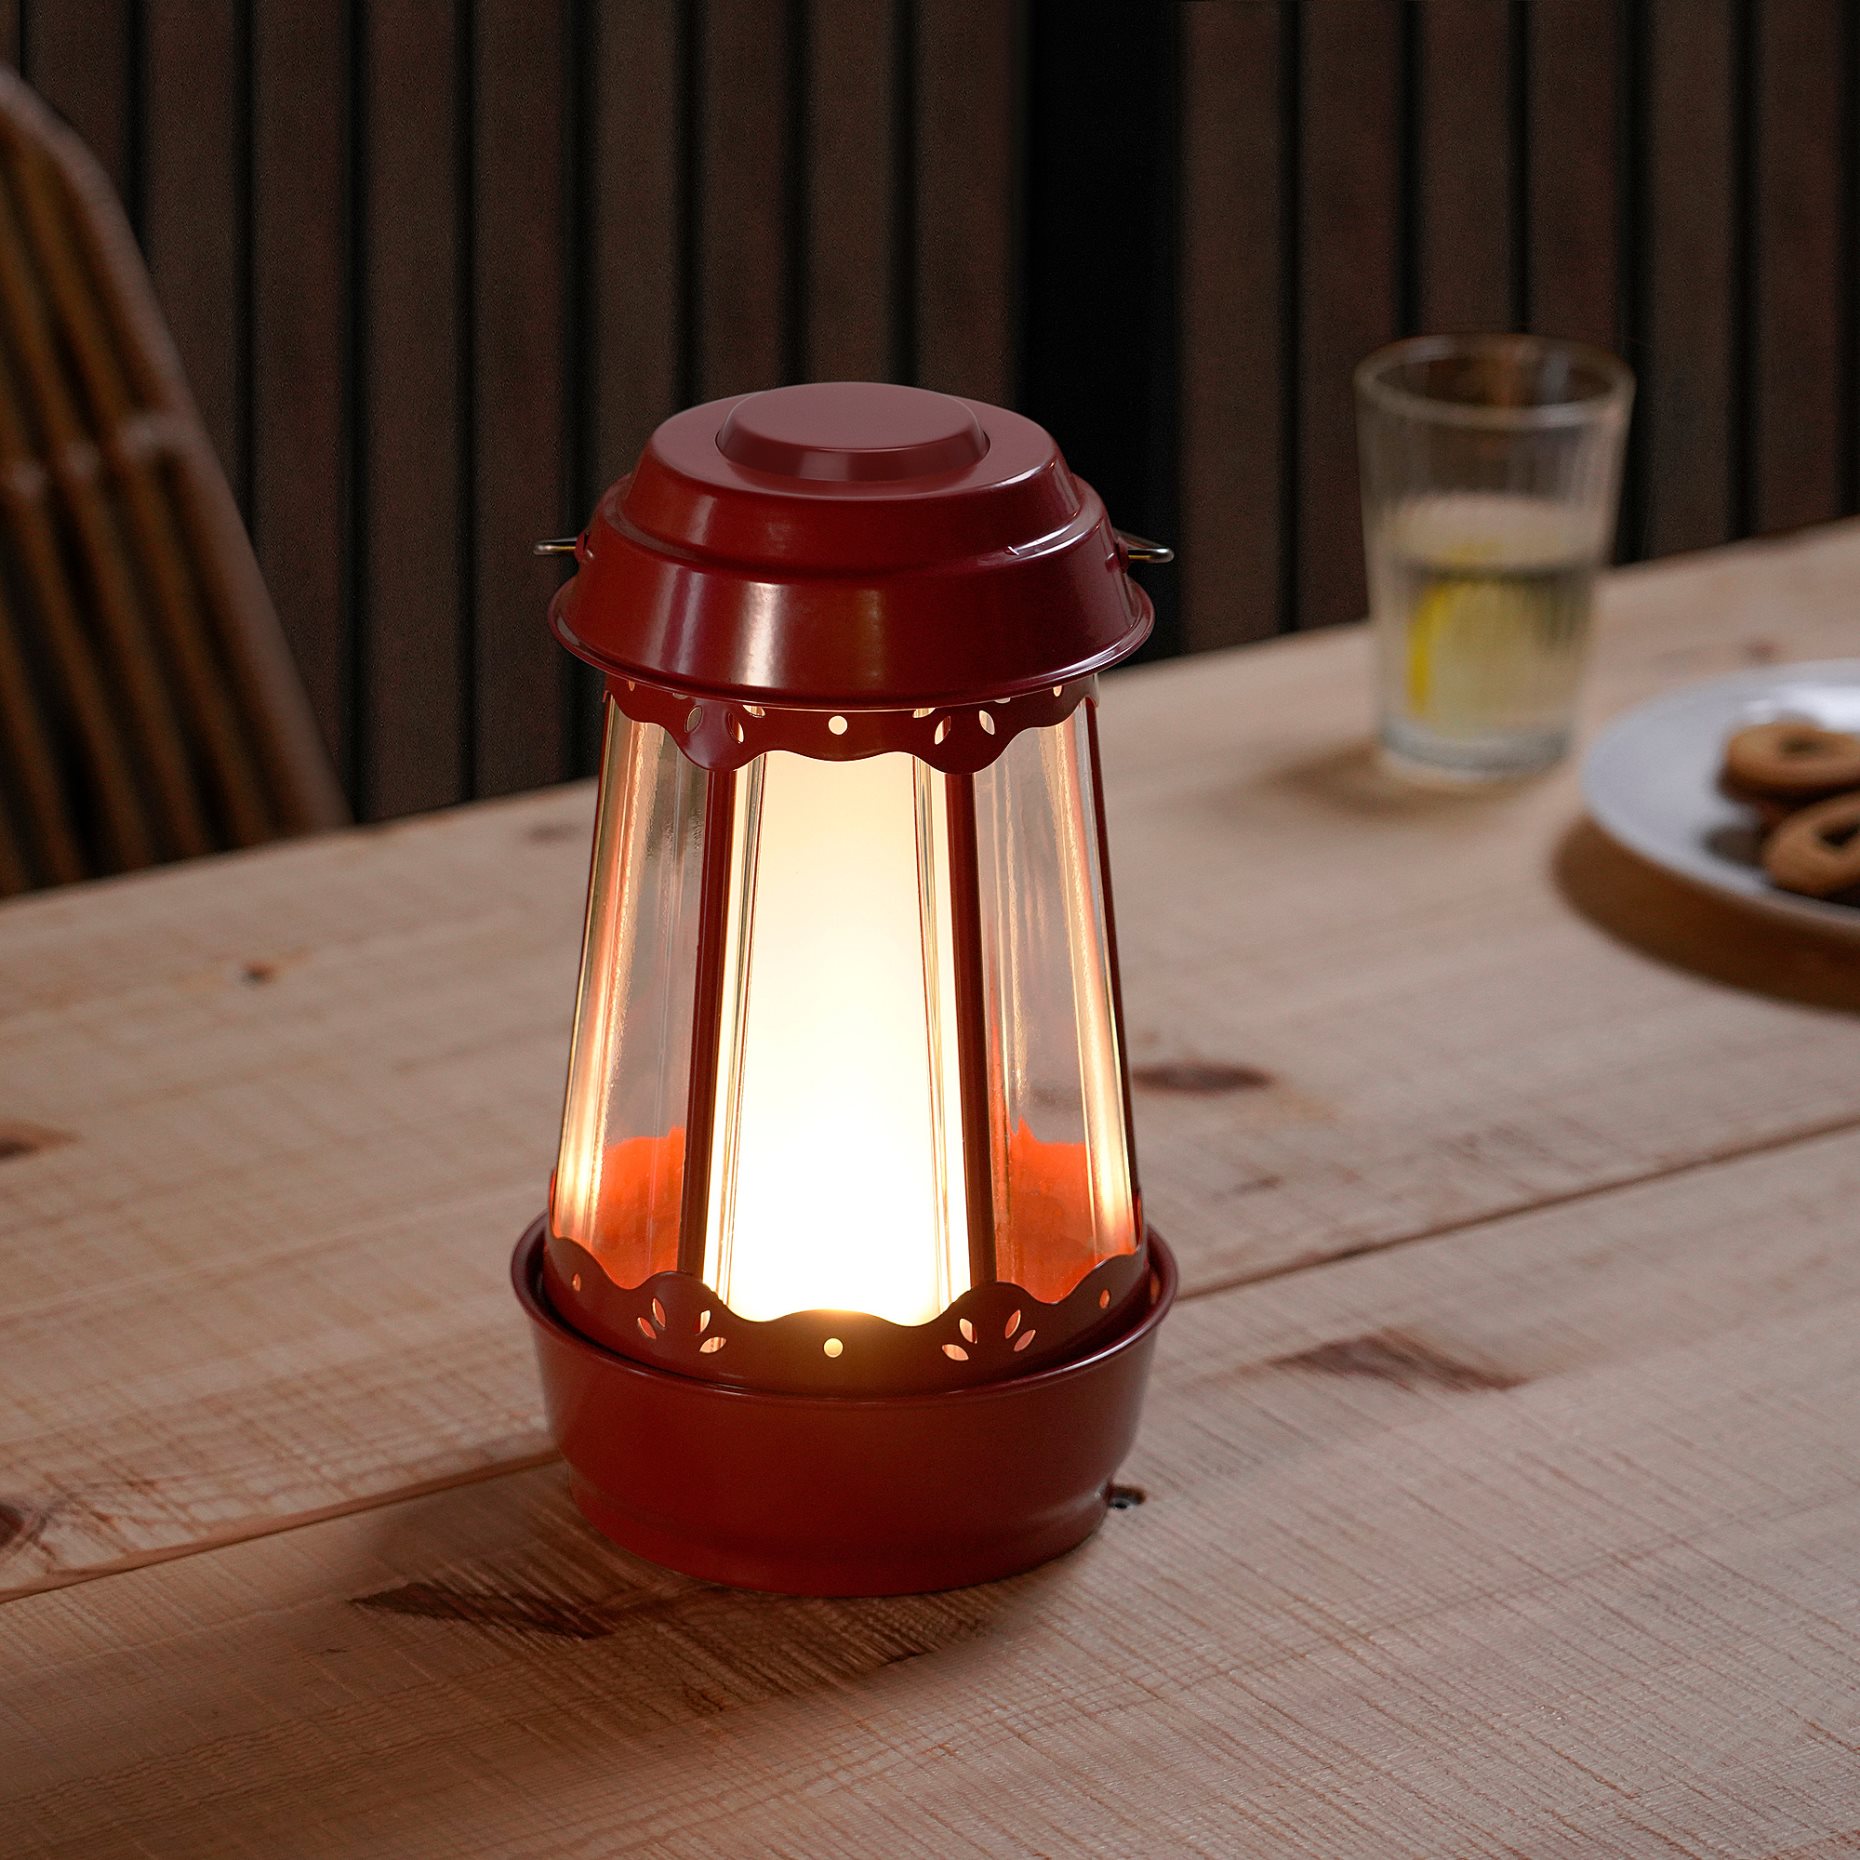 SOMMARLÅNKE, decorative table lamp with built-in LED light source/outdoor/battery-operated, 805.439.70